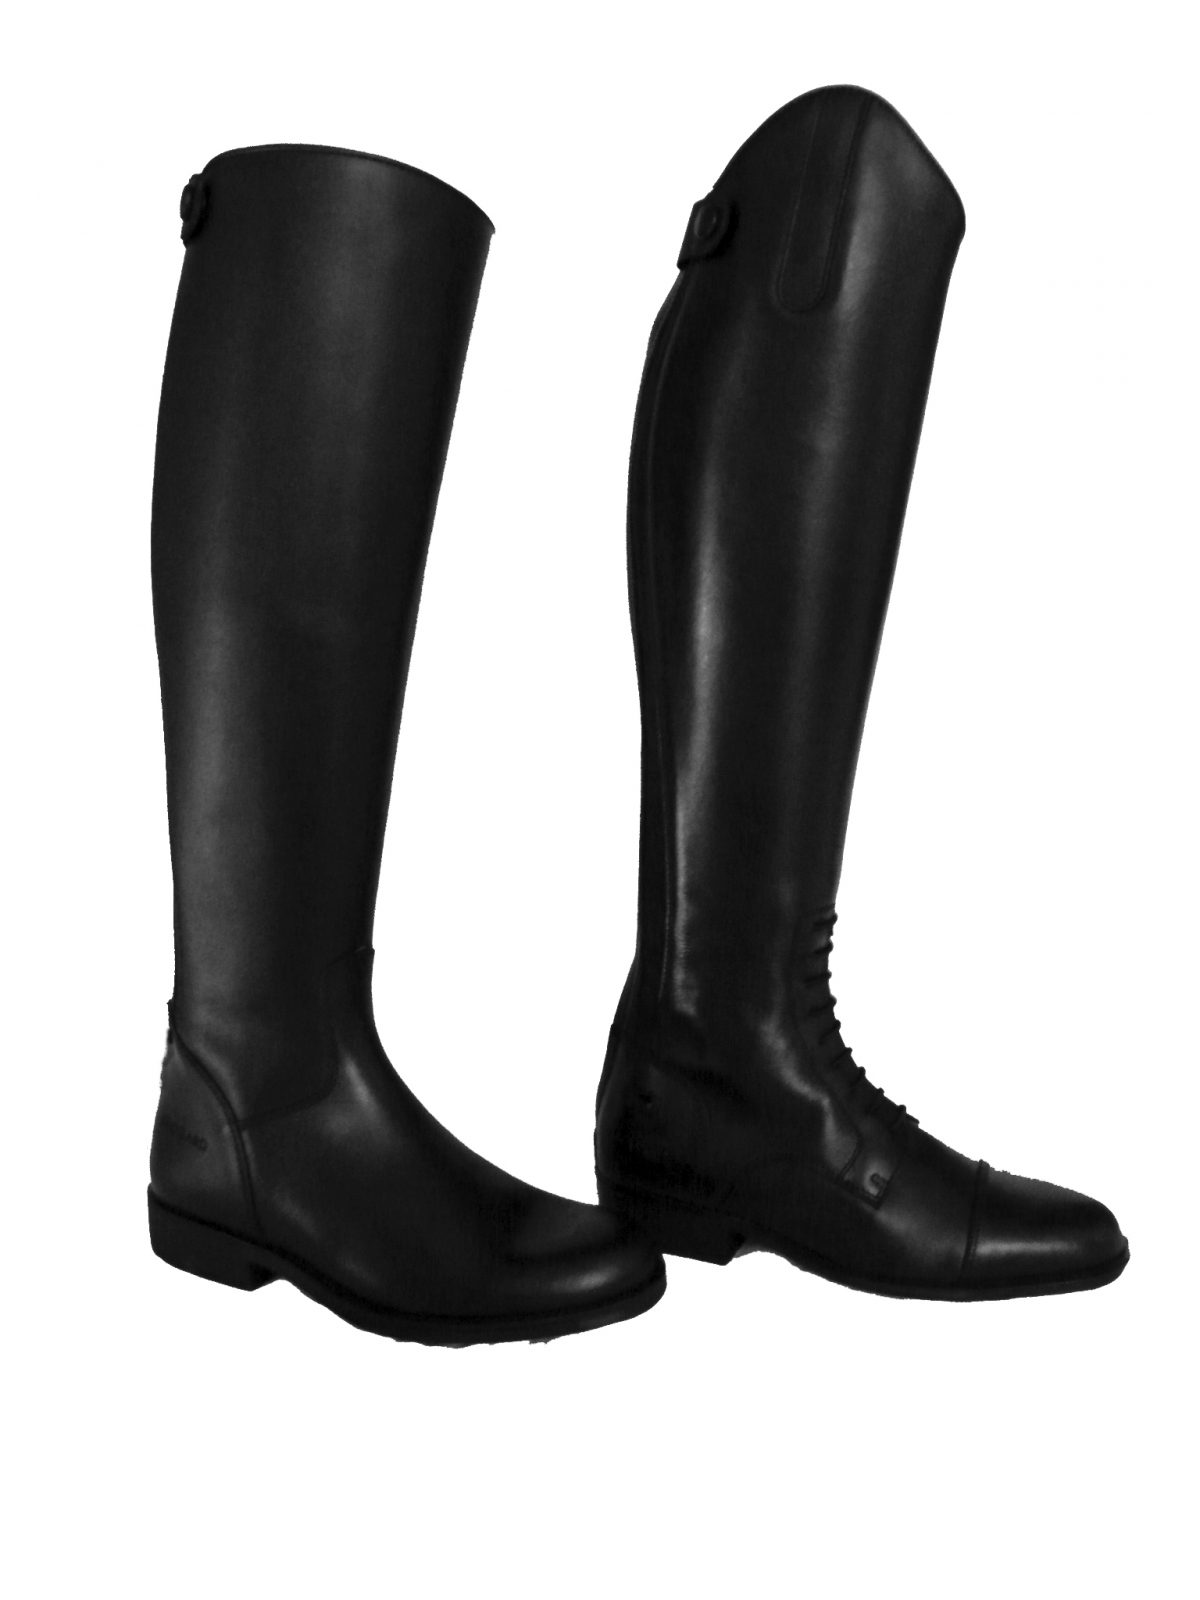 all leather riding boots